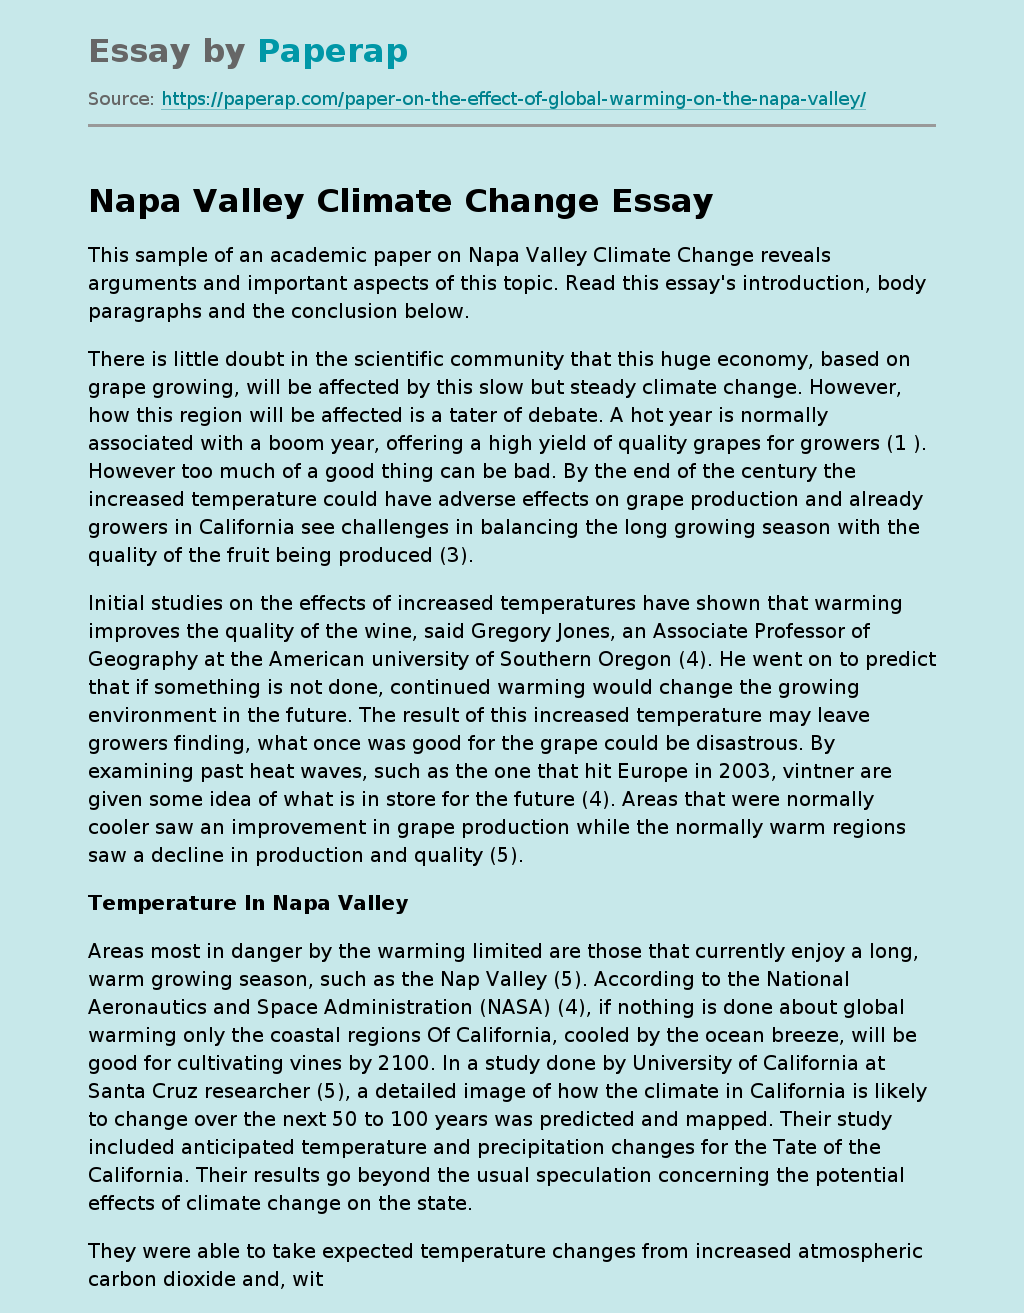 Napa Valley Climate Change